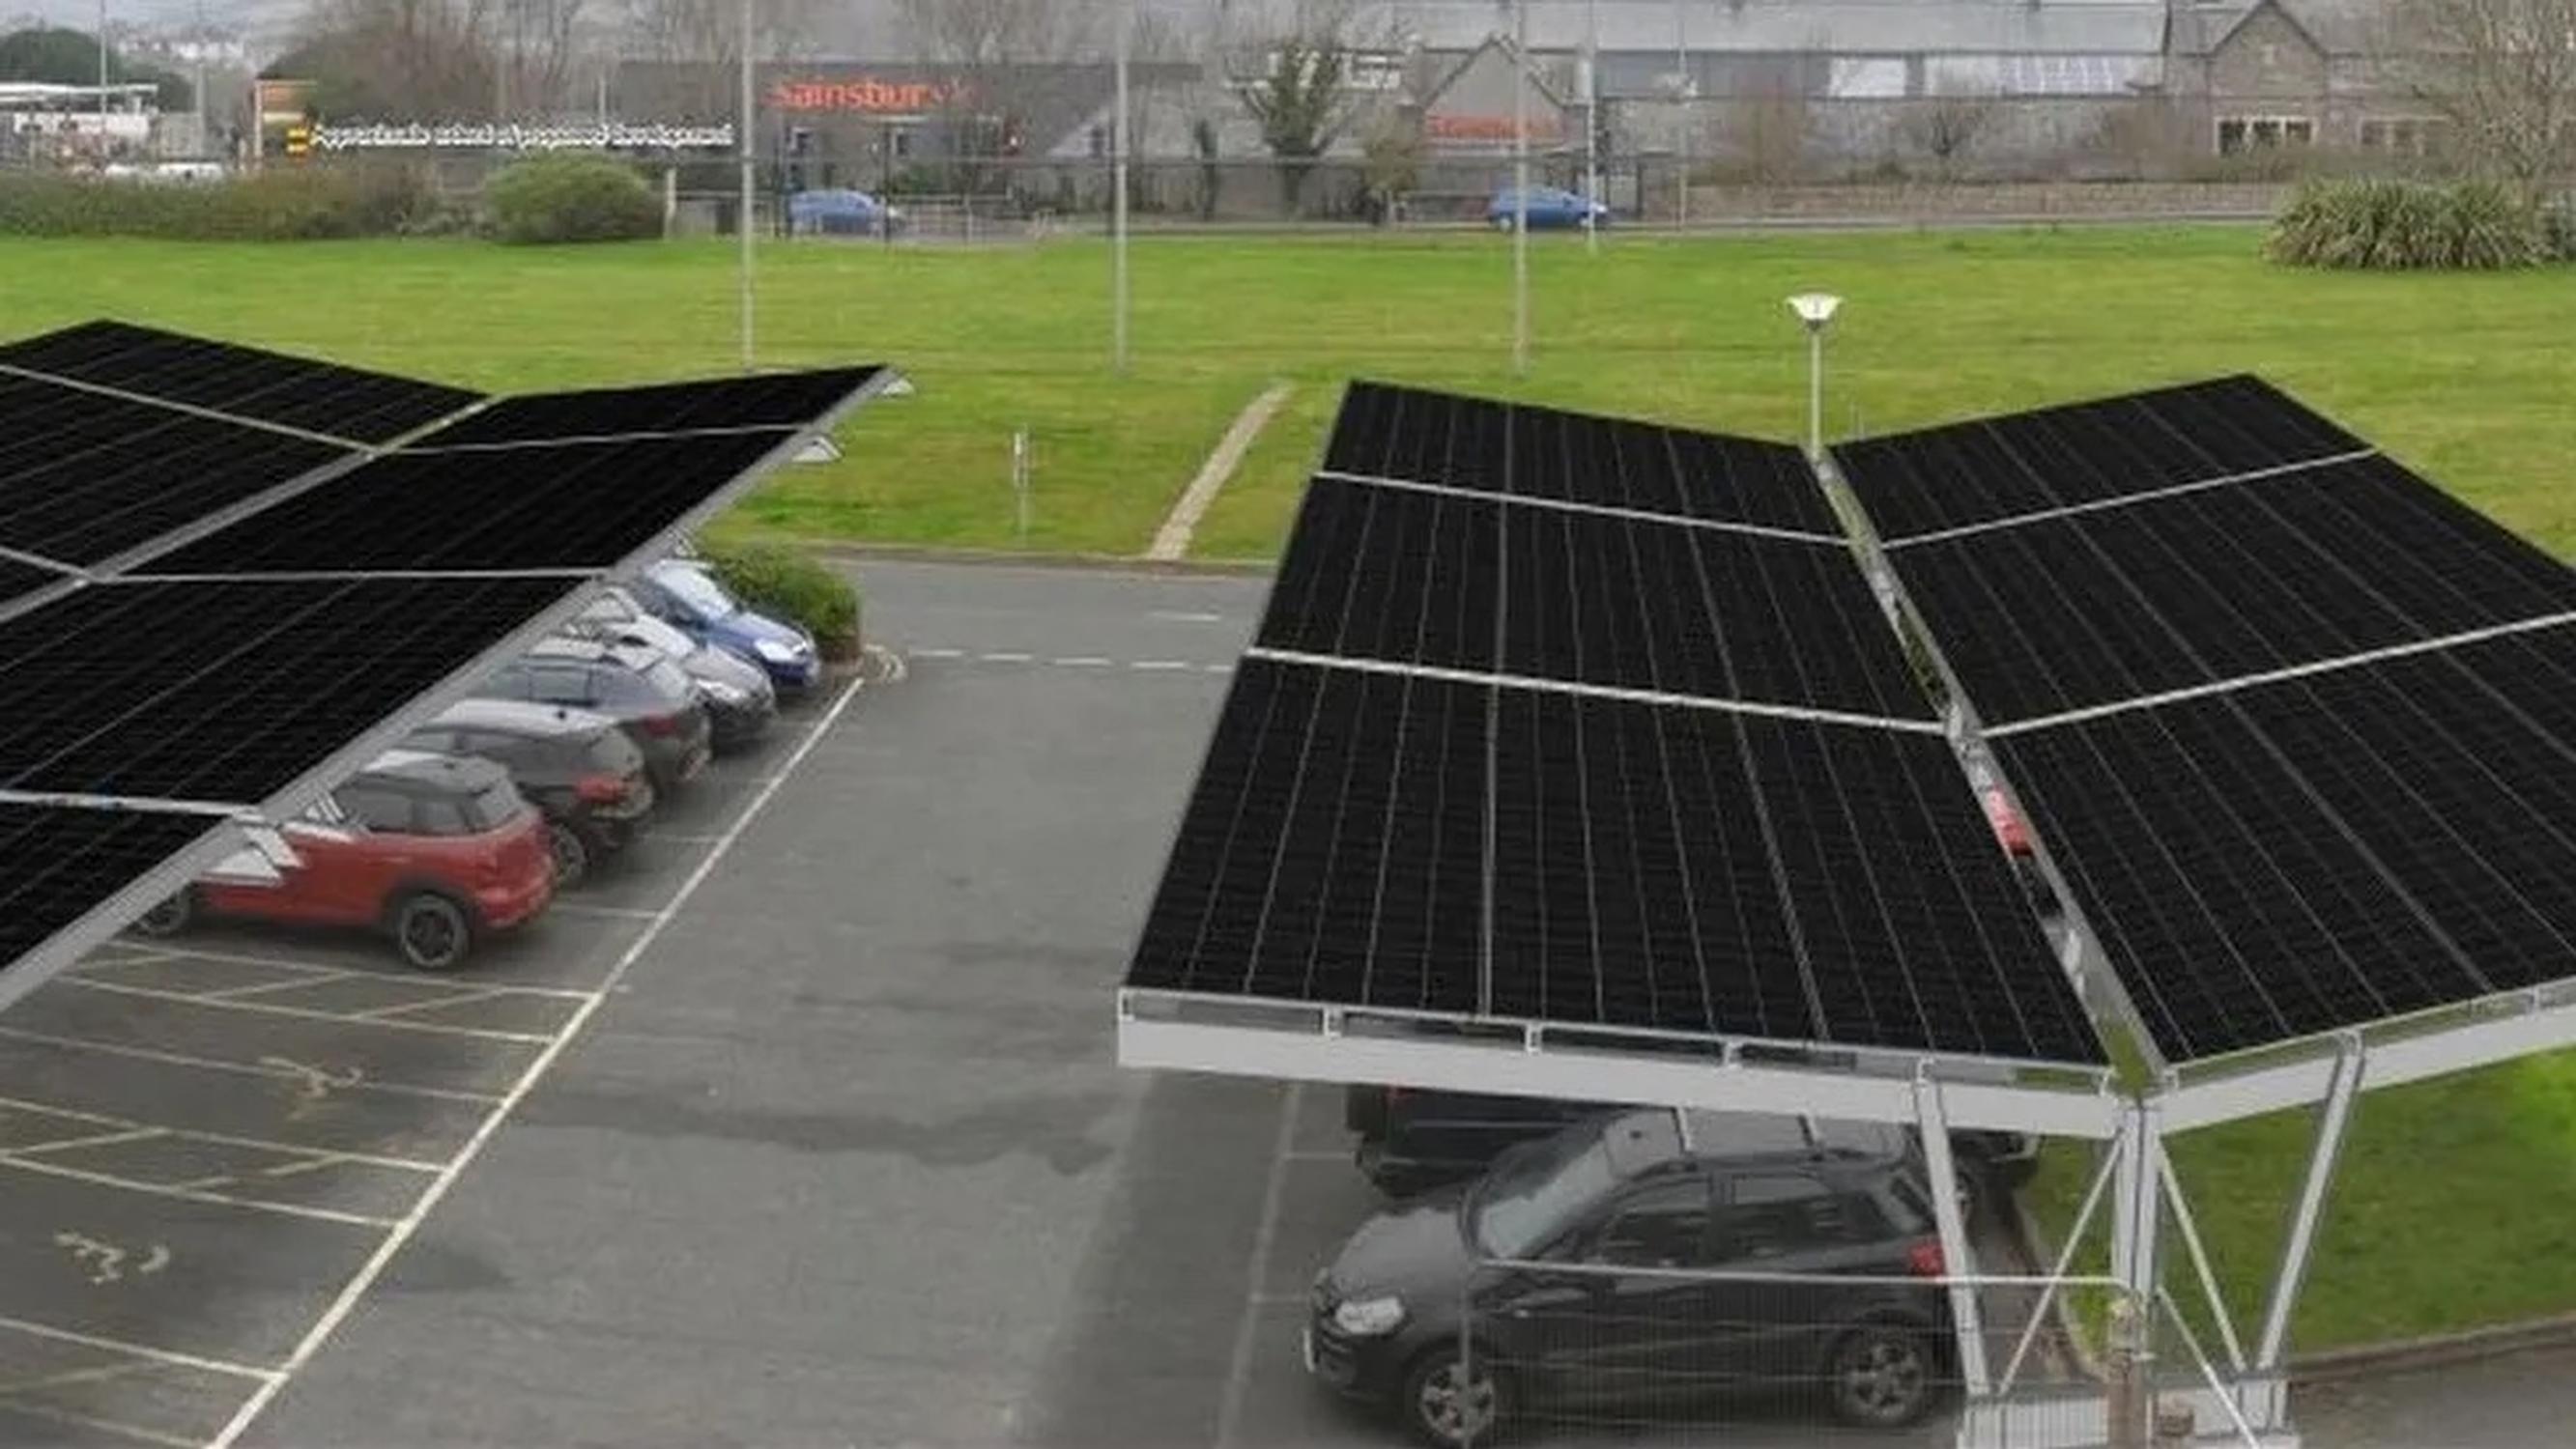 A solar canopy will be built over the visitor and council pool vehicle car parks at the front of New County Hall